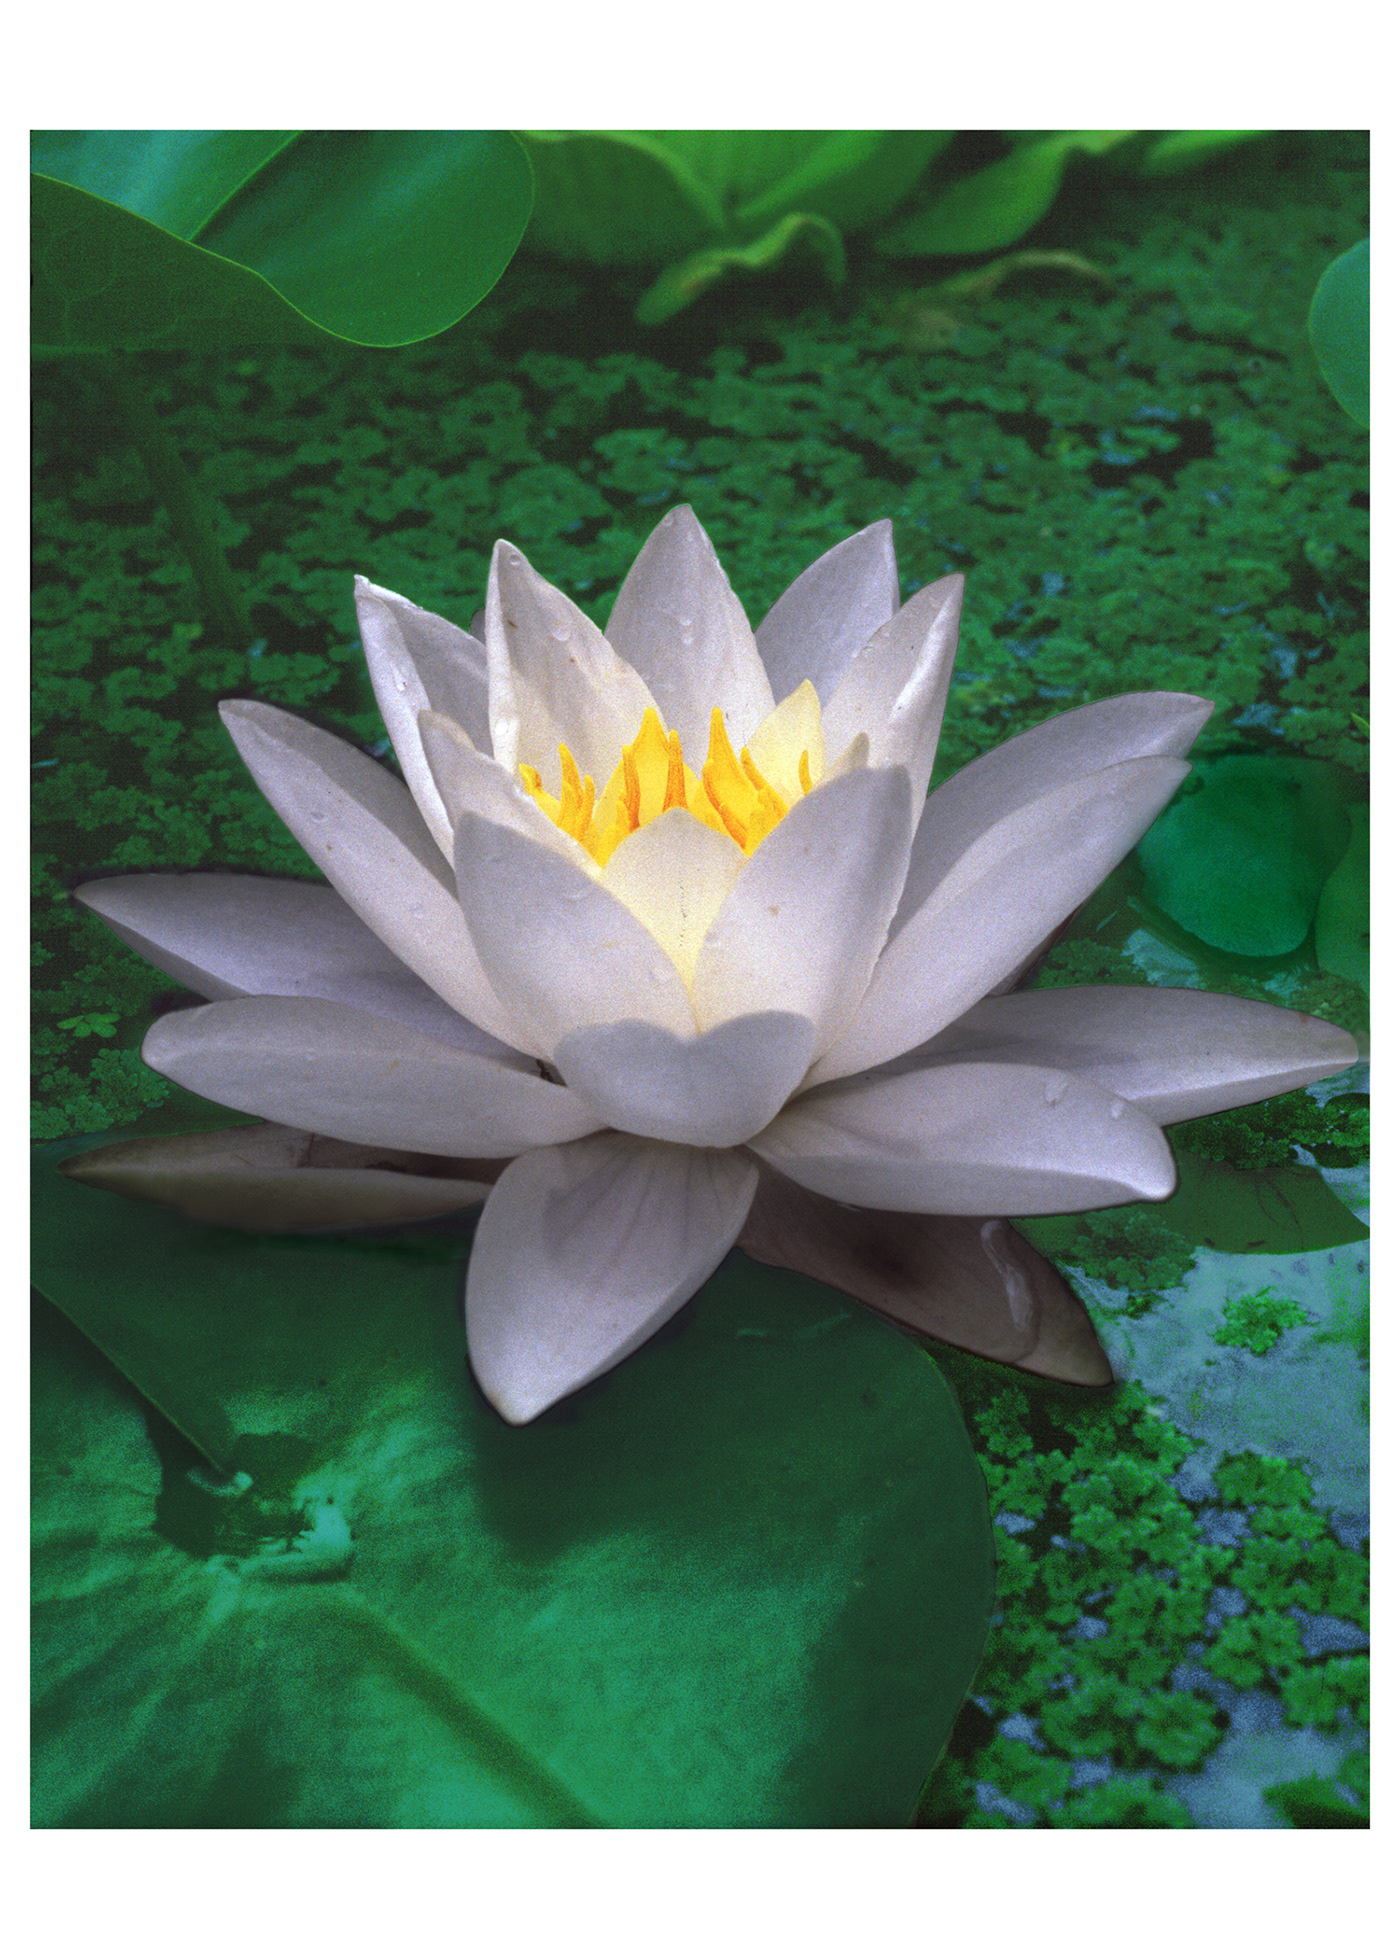 Image may contain: flower, lotus and fragrant white water lily